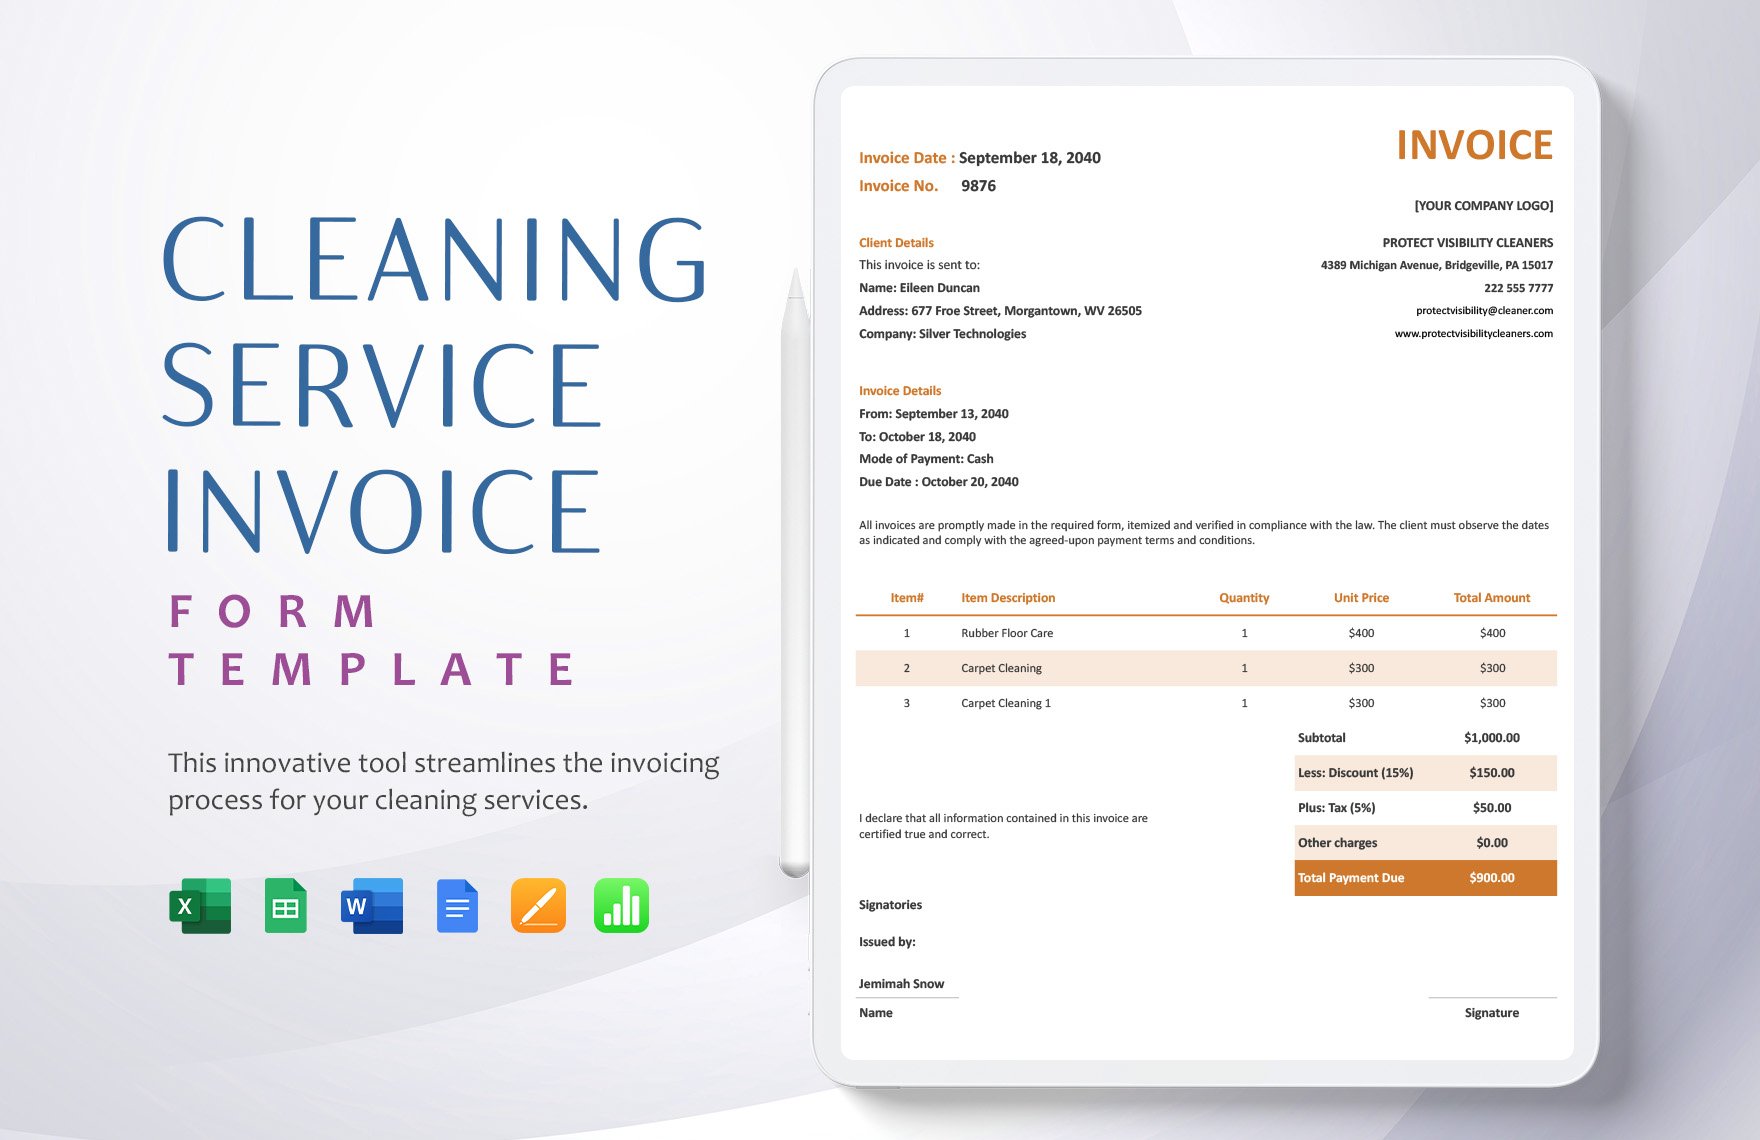 Cleaning Service Invoice Form Template in Word, Google Docs, Excel, Google Sheets, Apple Pages, Apple Numbers